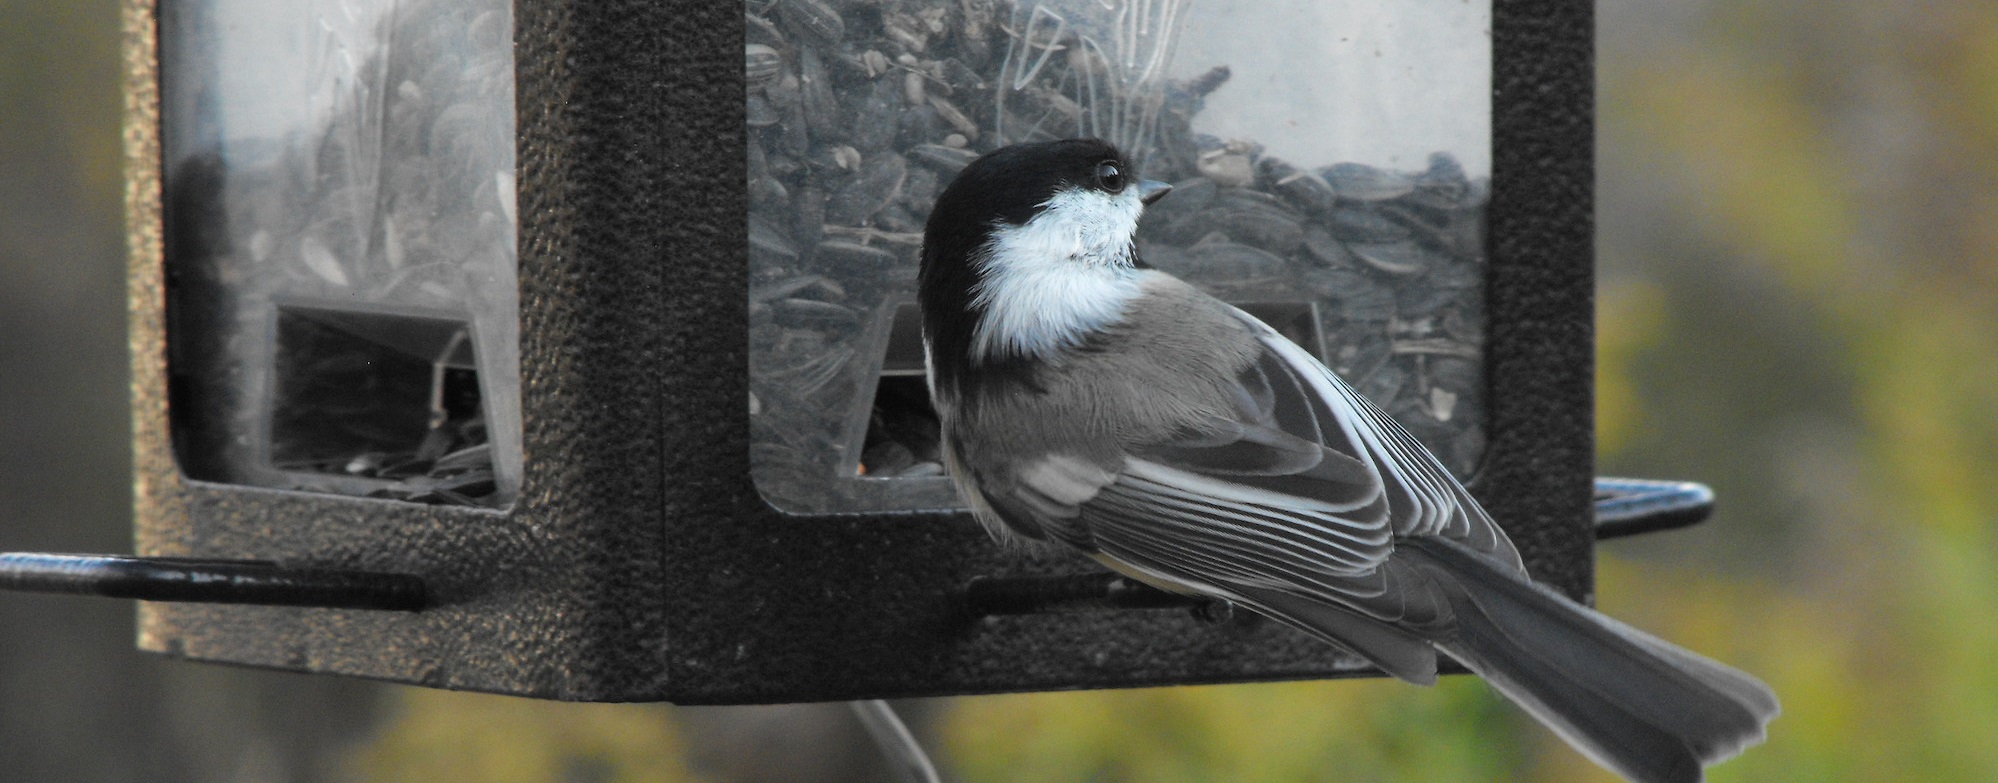 Chickadee perched on a feeder for birds